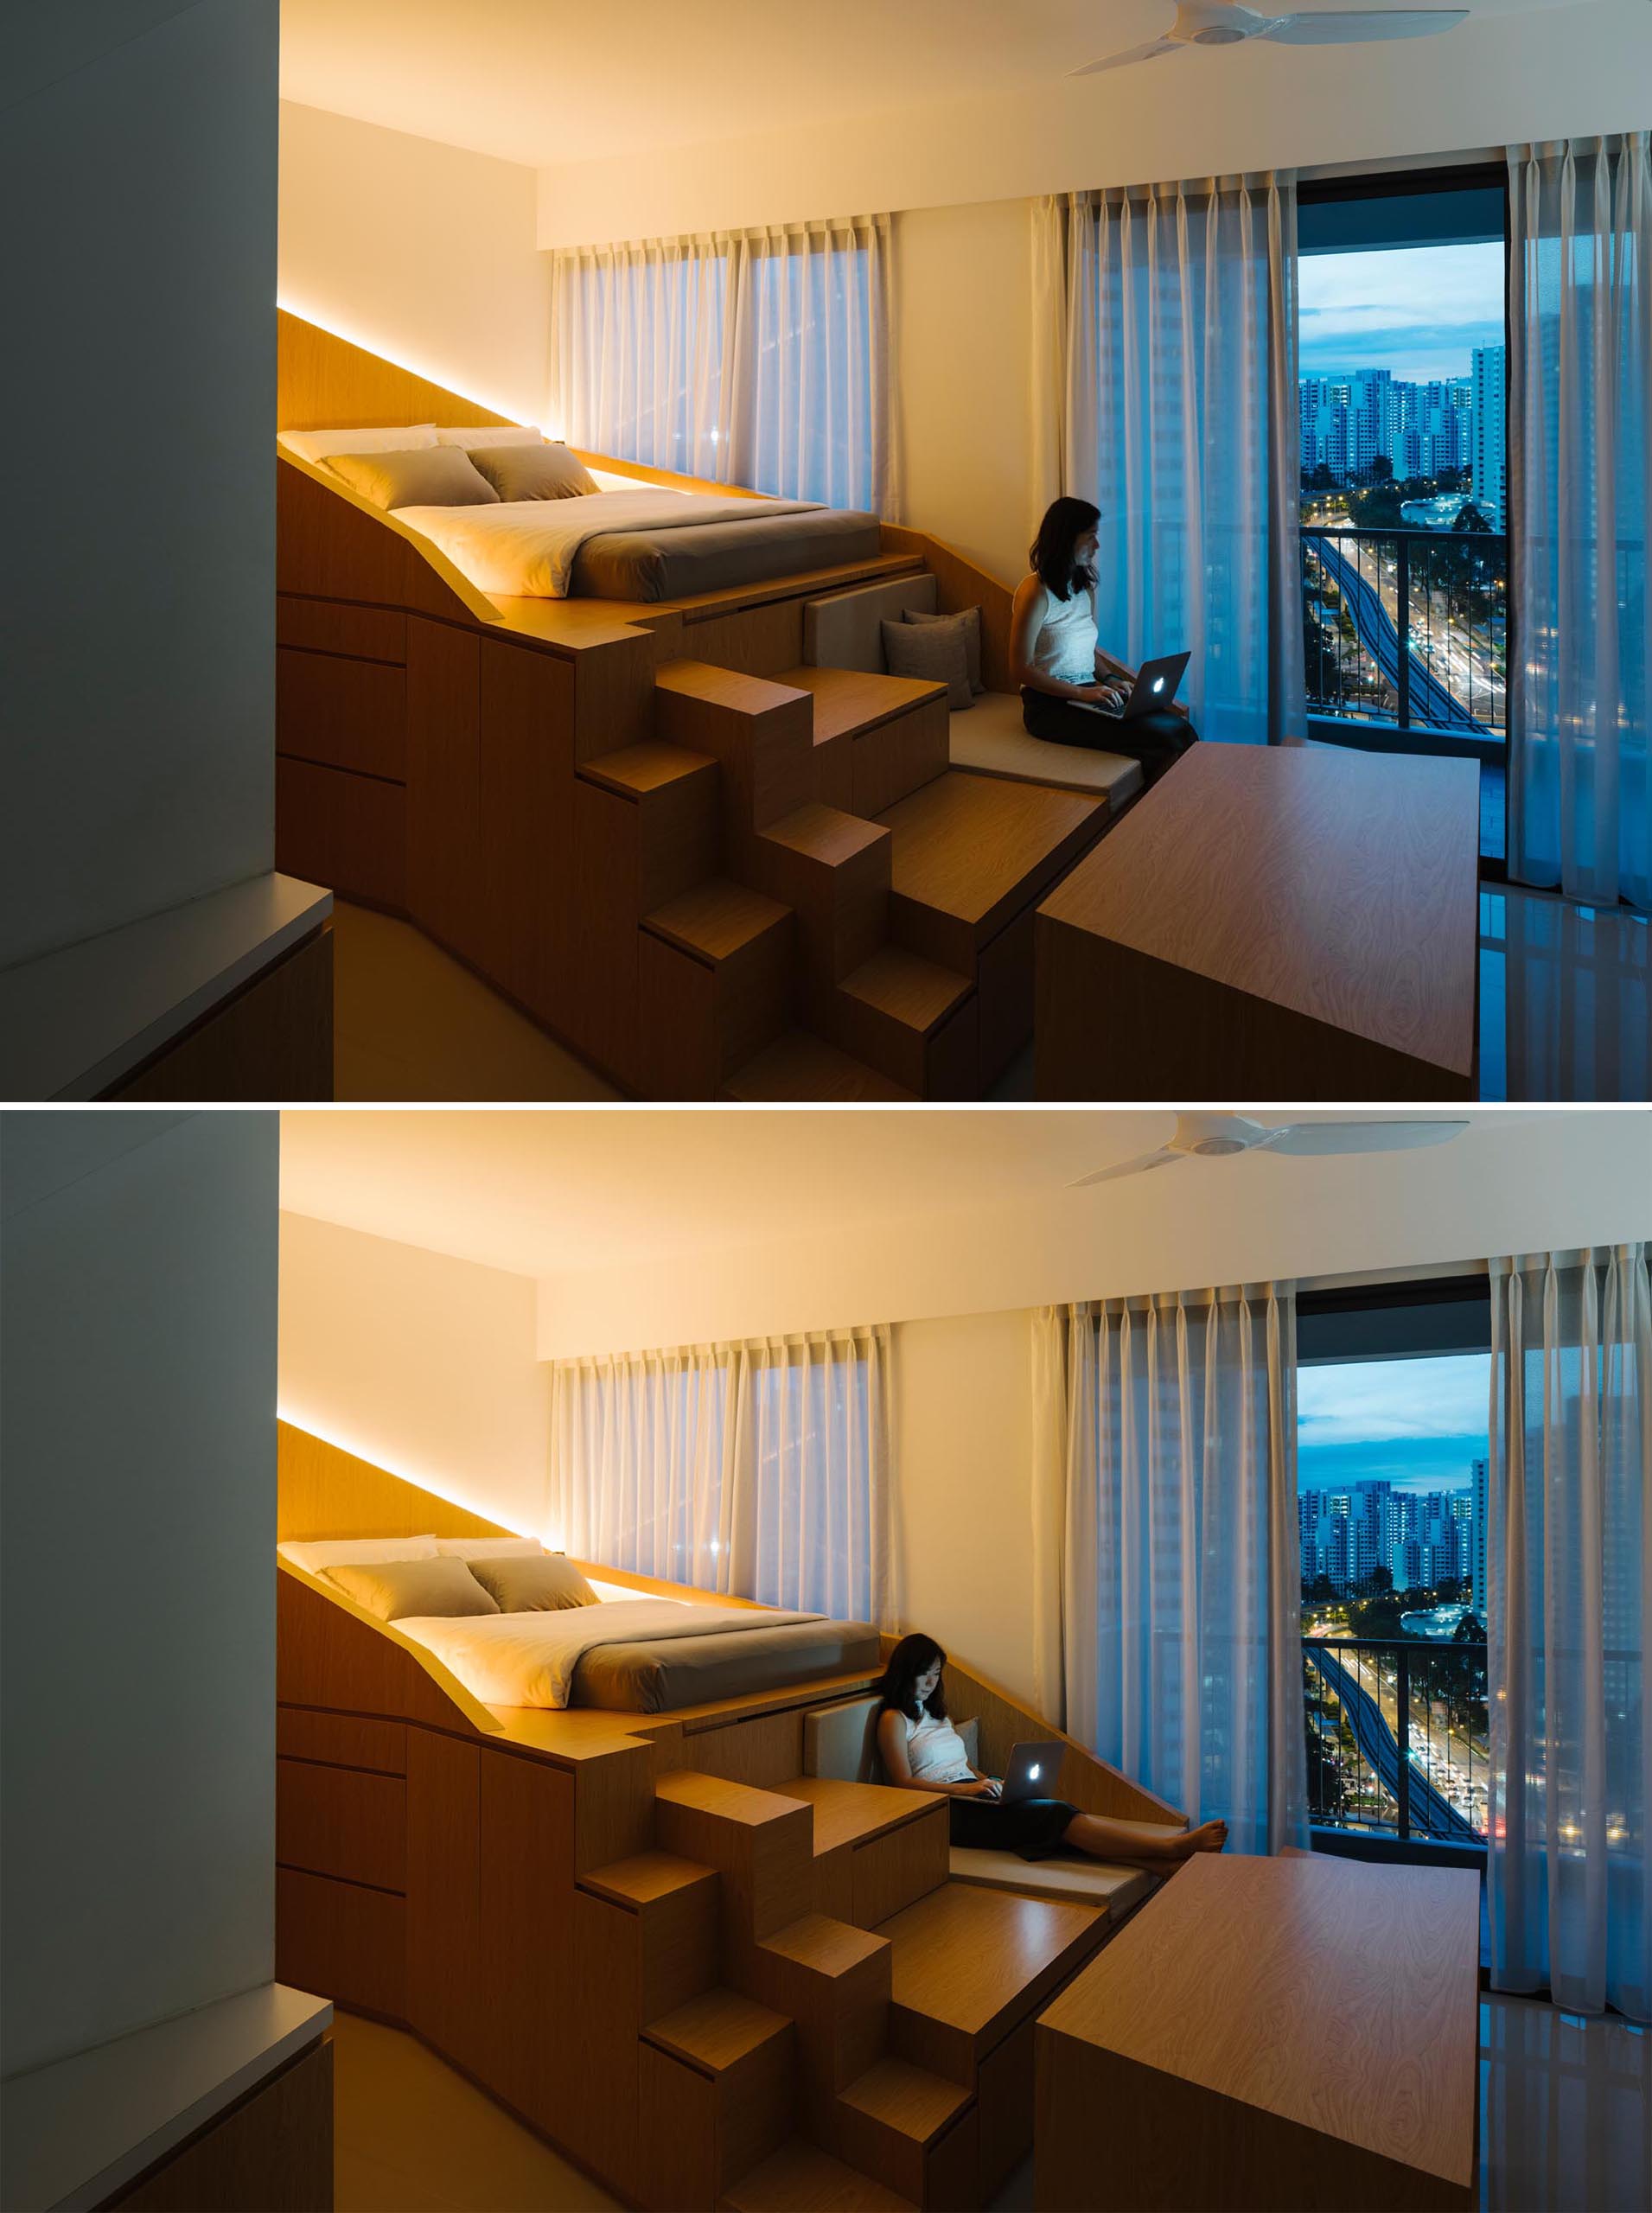 At night, hidden lighting highlights the outline of this custom loft bed with storage, and provides a soft glow to the room, adding to the coziness.